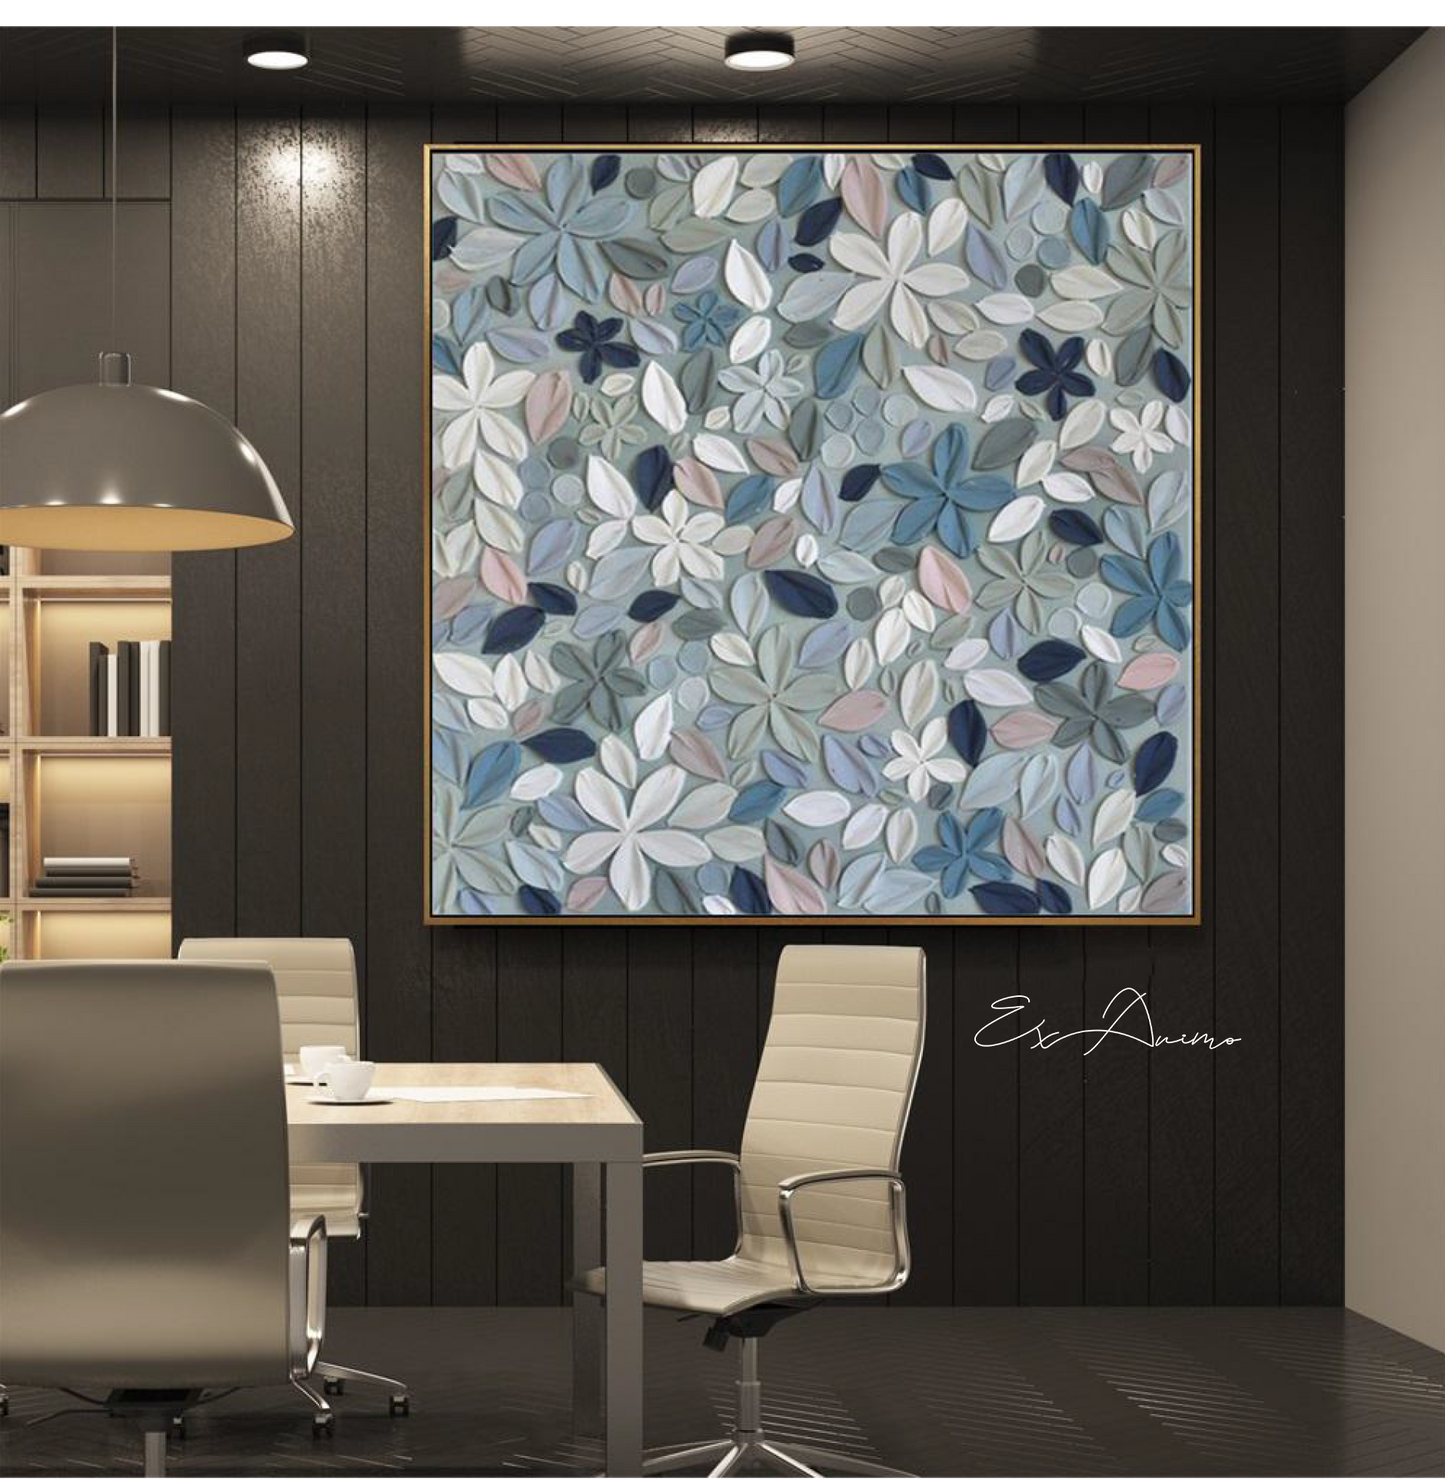 Ex Animo Designs - Abstract Flower Heavily Textured Knife Palette Acrylic Painting